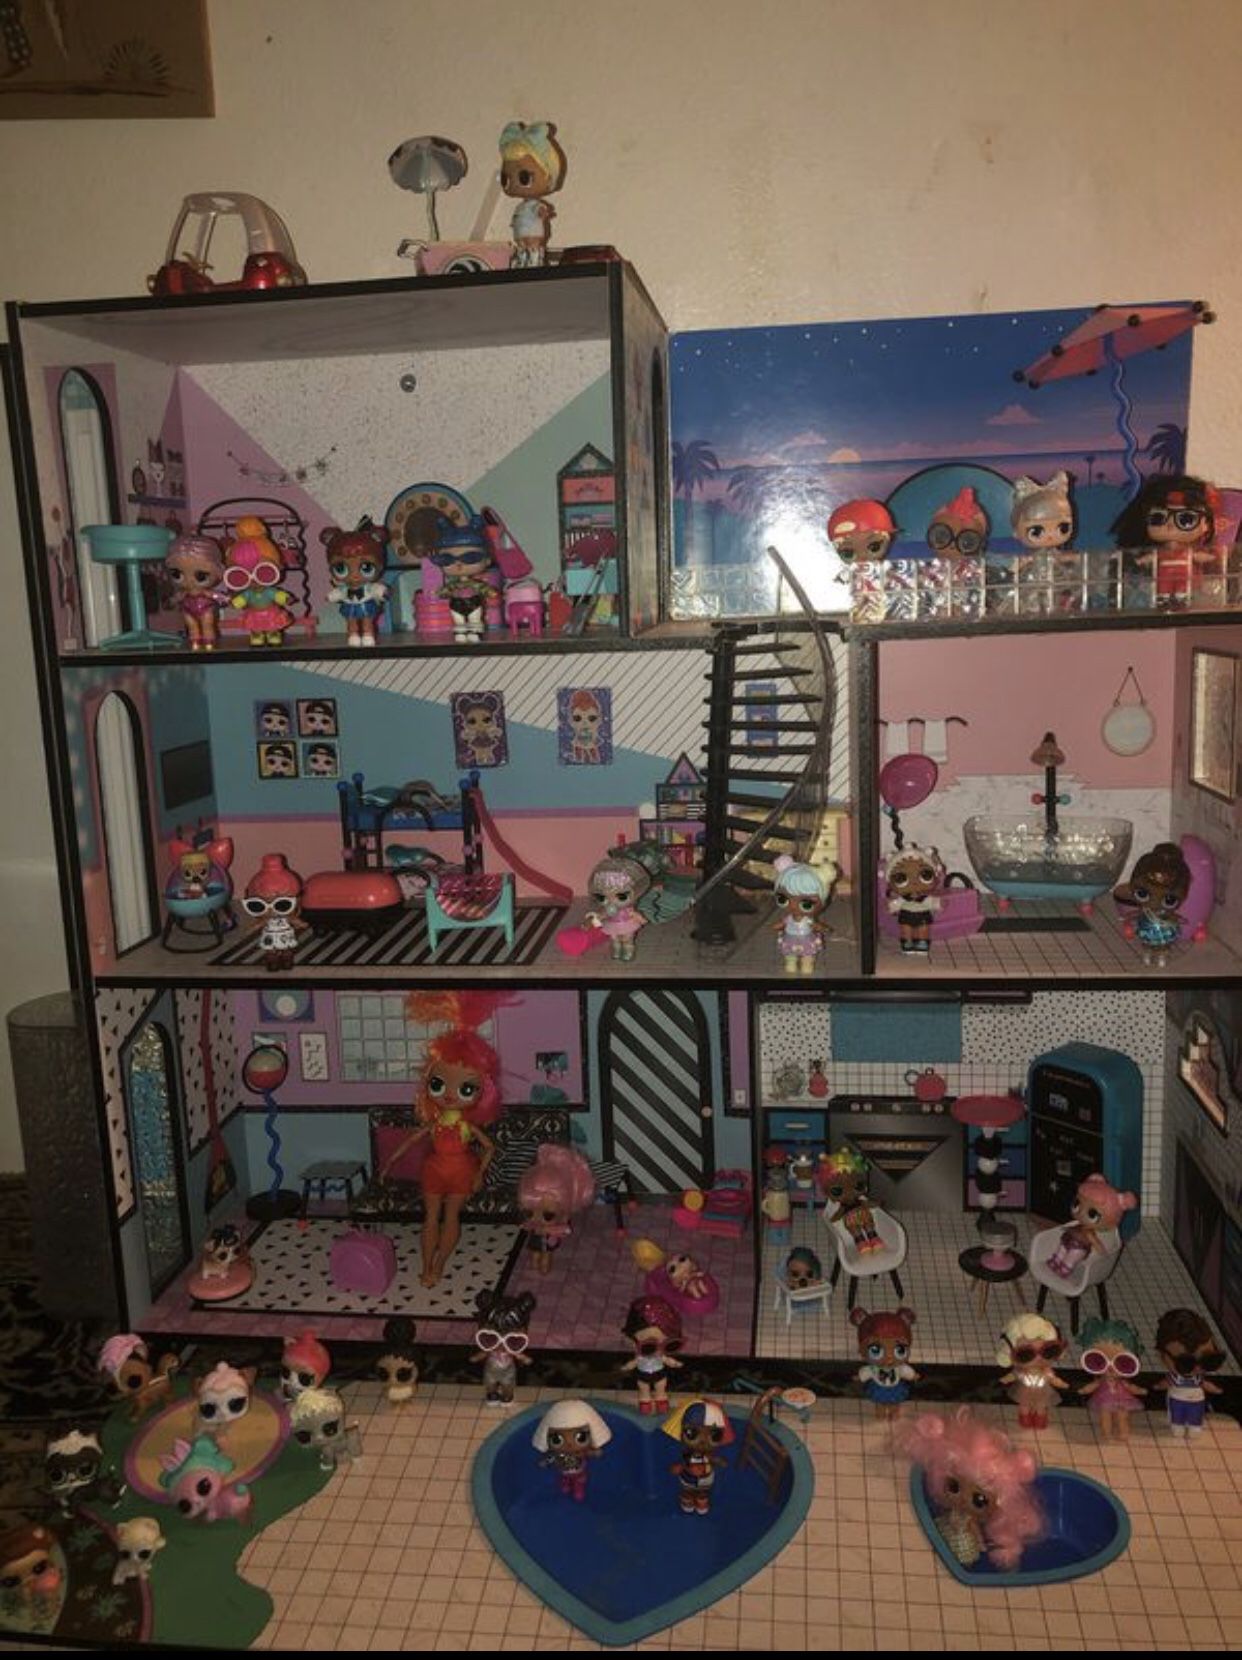 LOL doll house with dolls